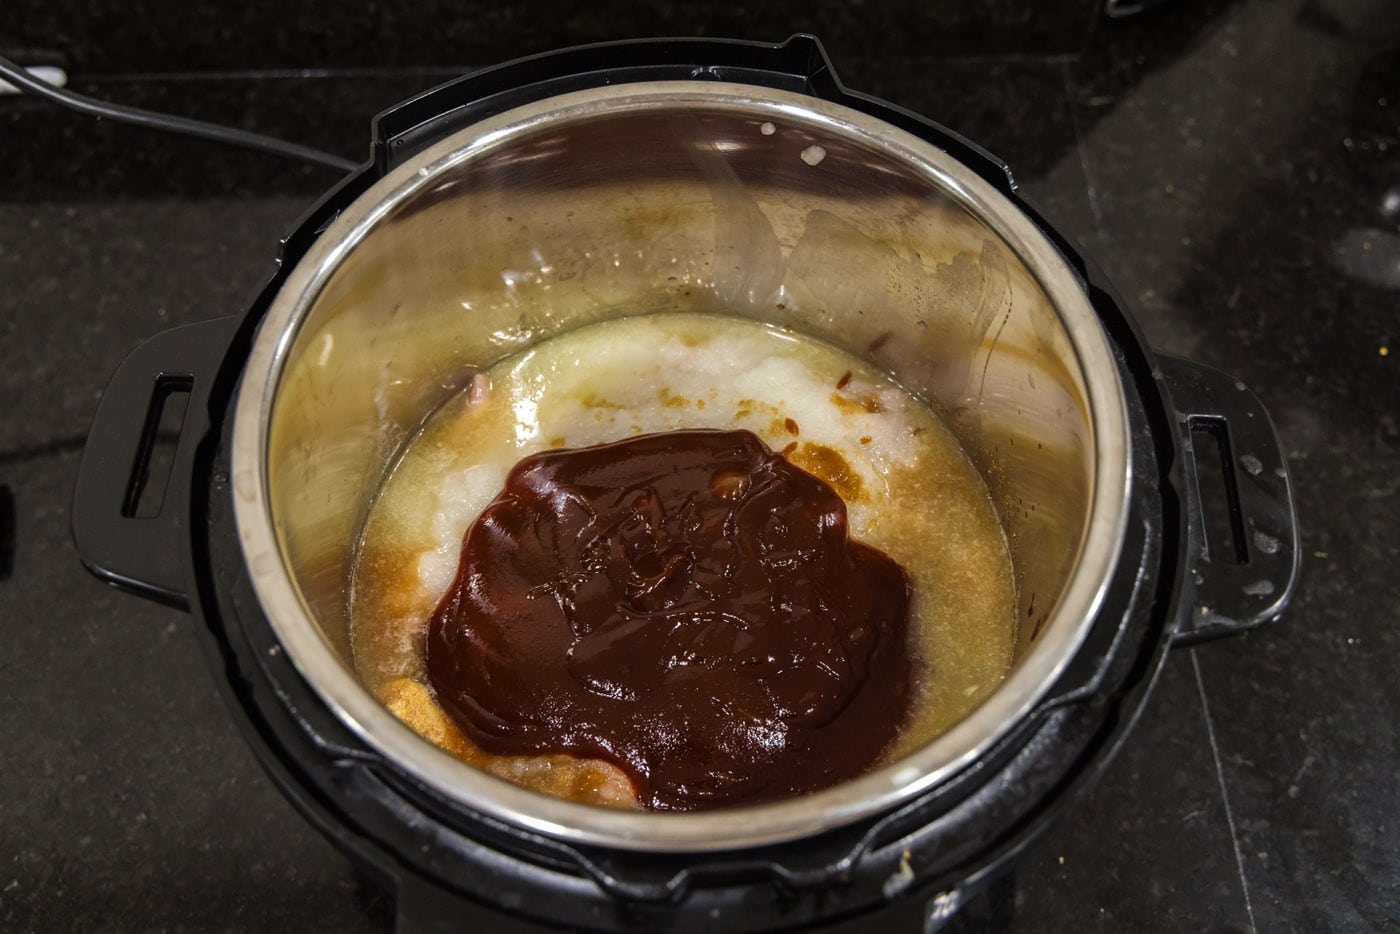 barbecue sauce added to chicken and stock in the instant pot